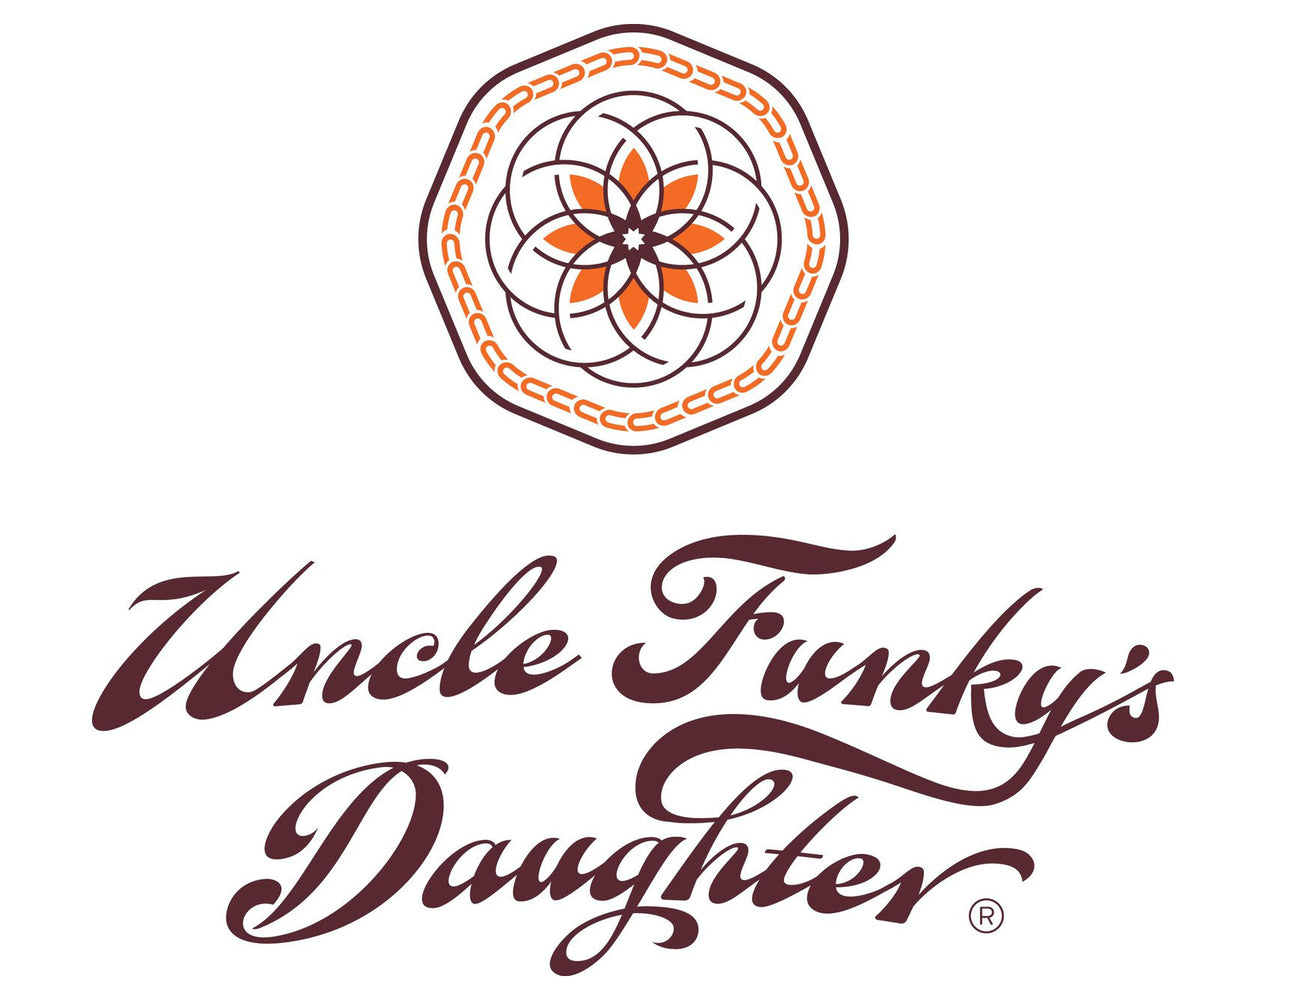 Uncle Funky's Daughter